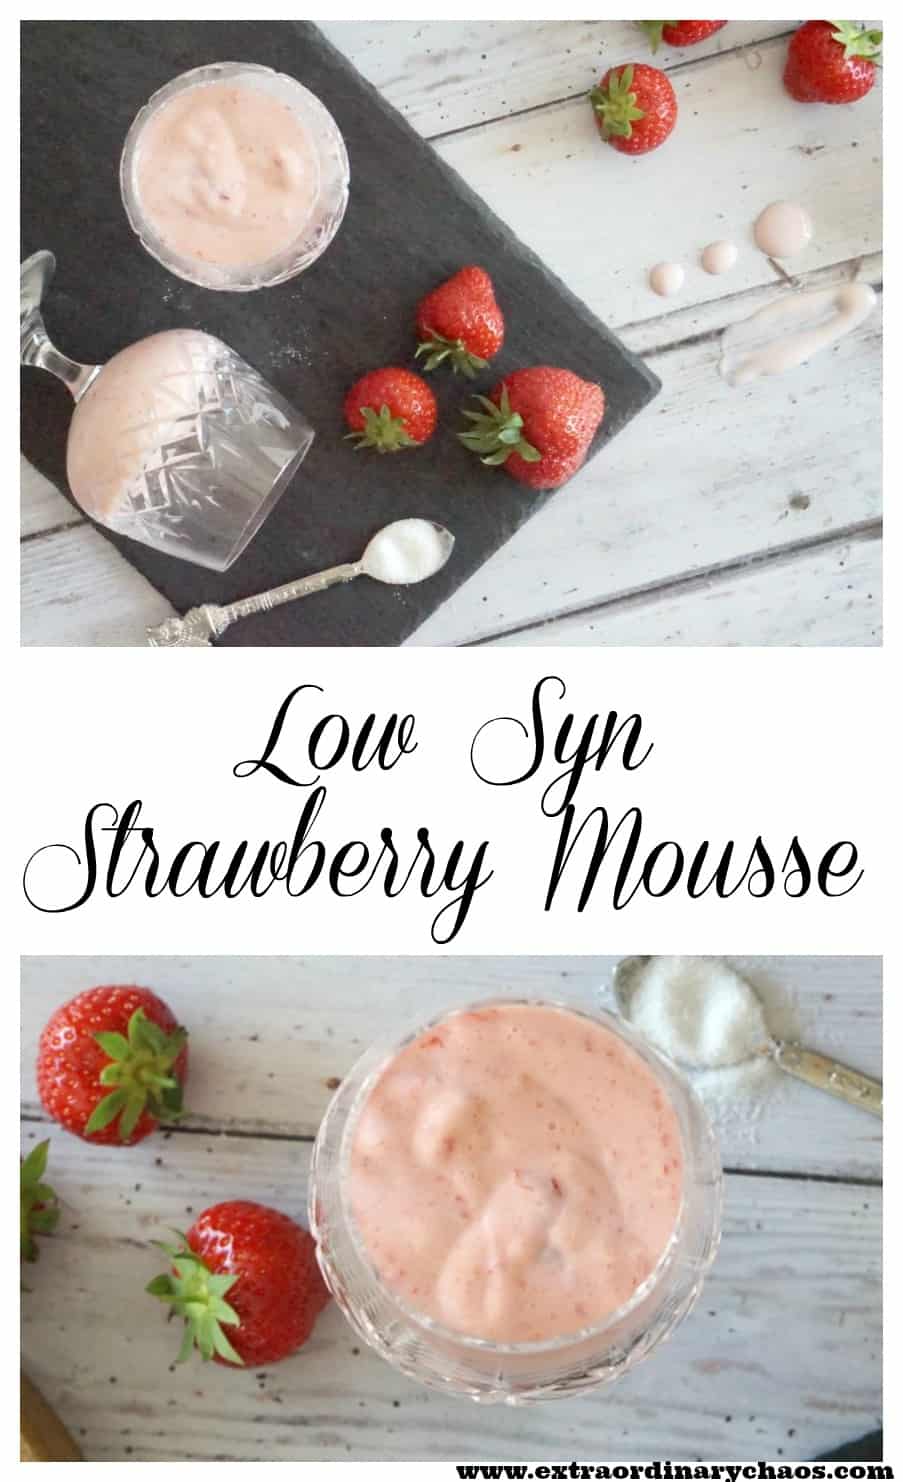 Low Syn Strawberry Mousse Easy to make and perfect to serve as a slimming world friendly low fat dessert at dinner parties